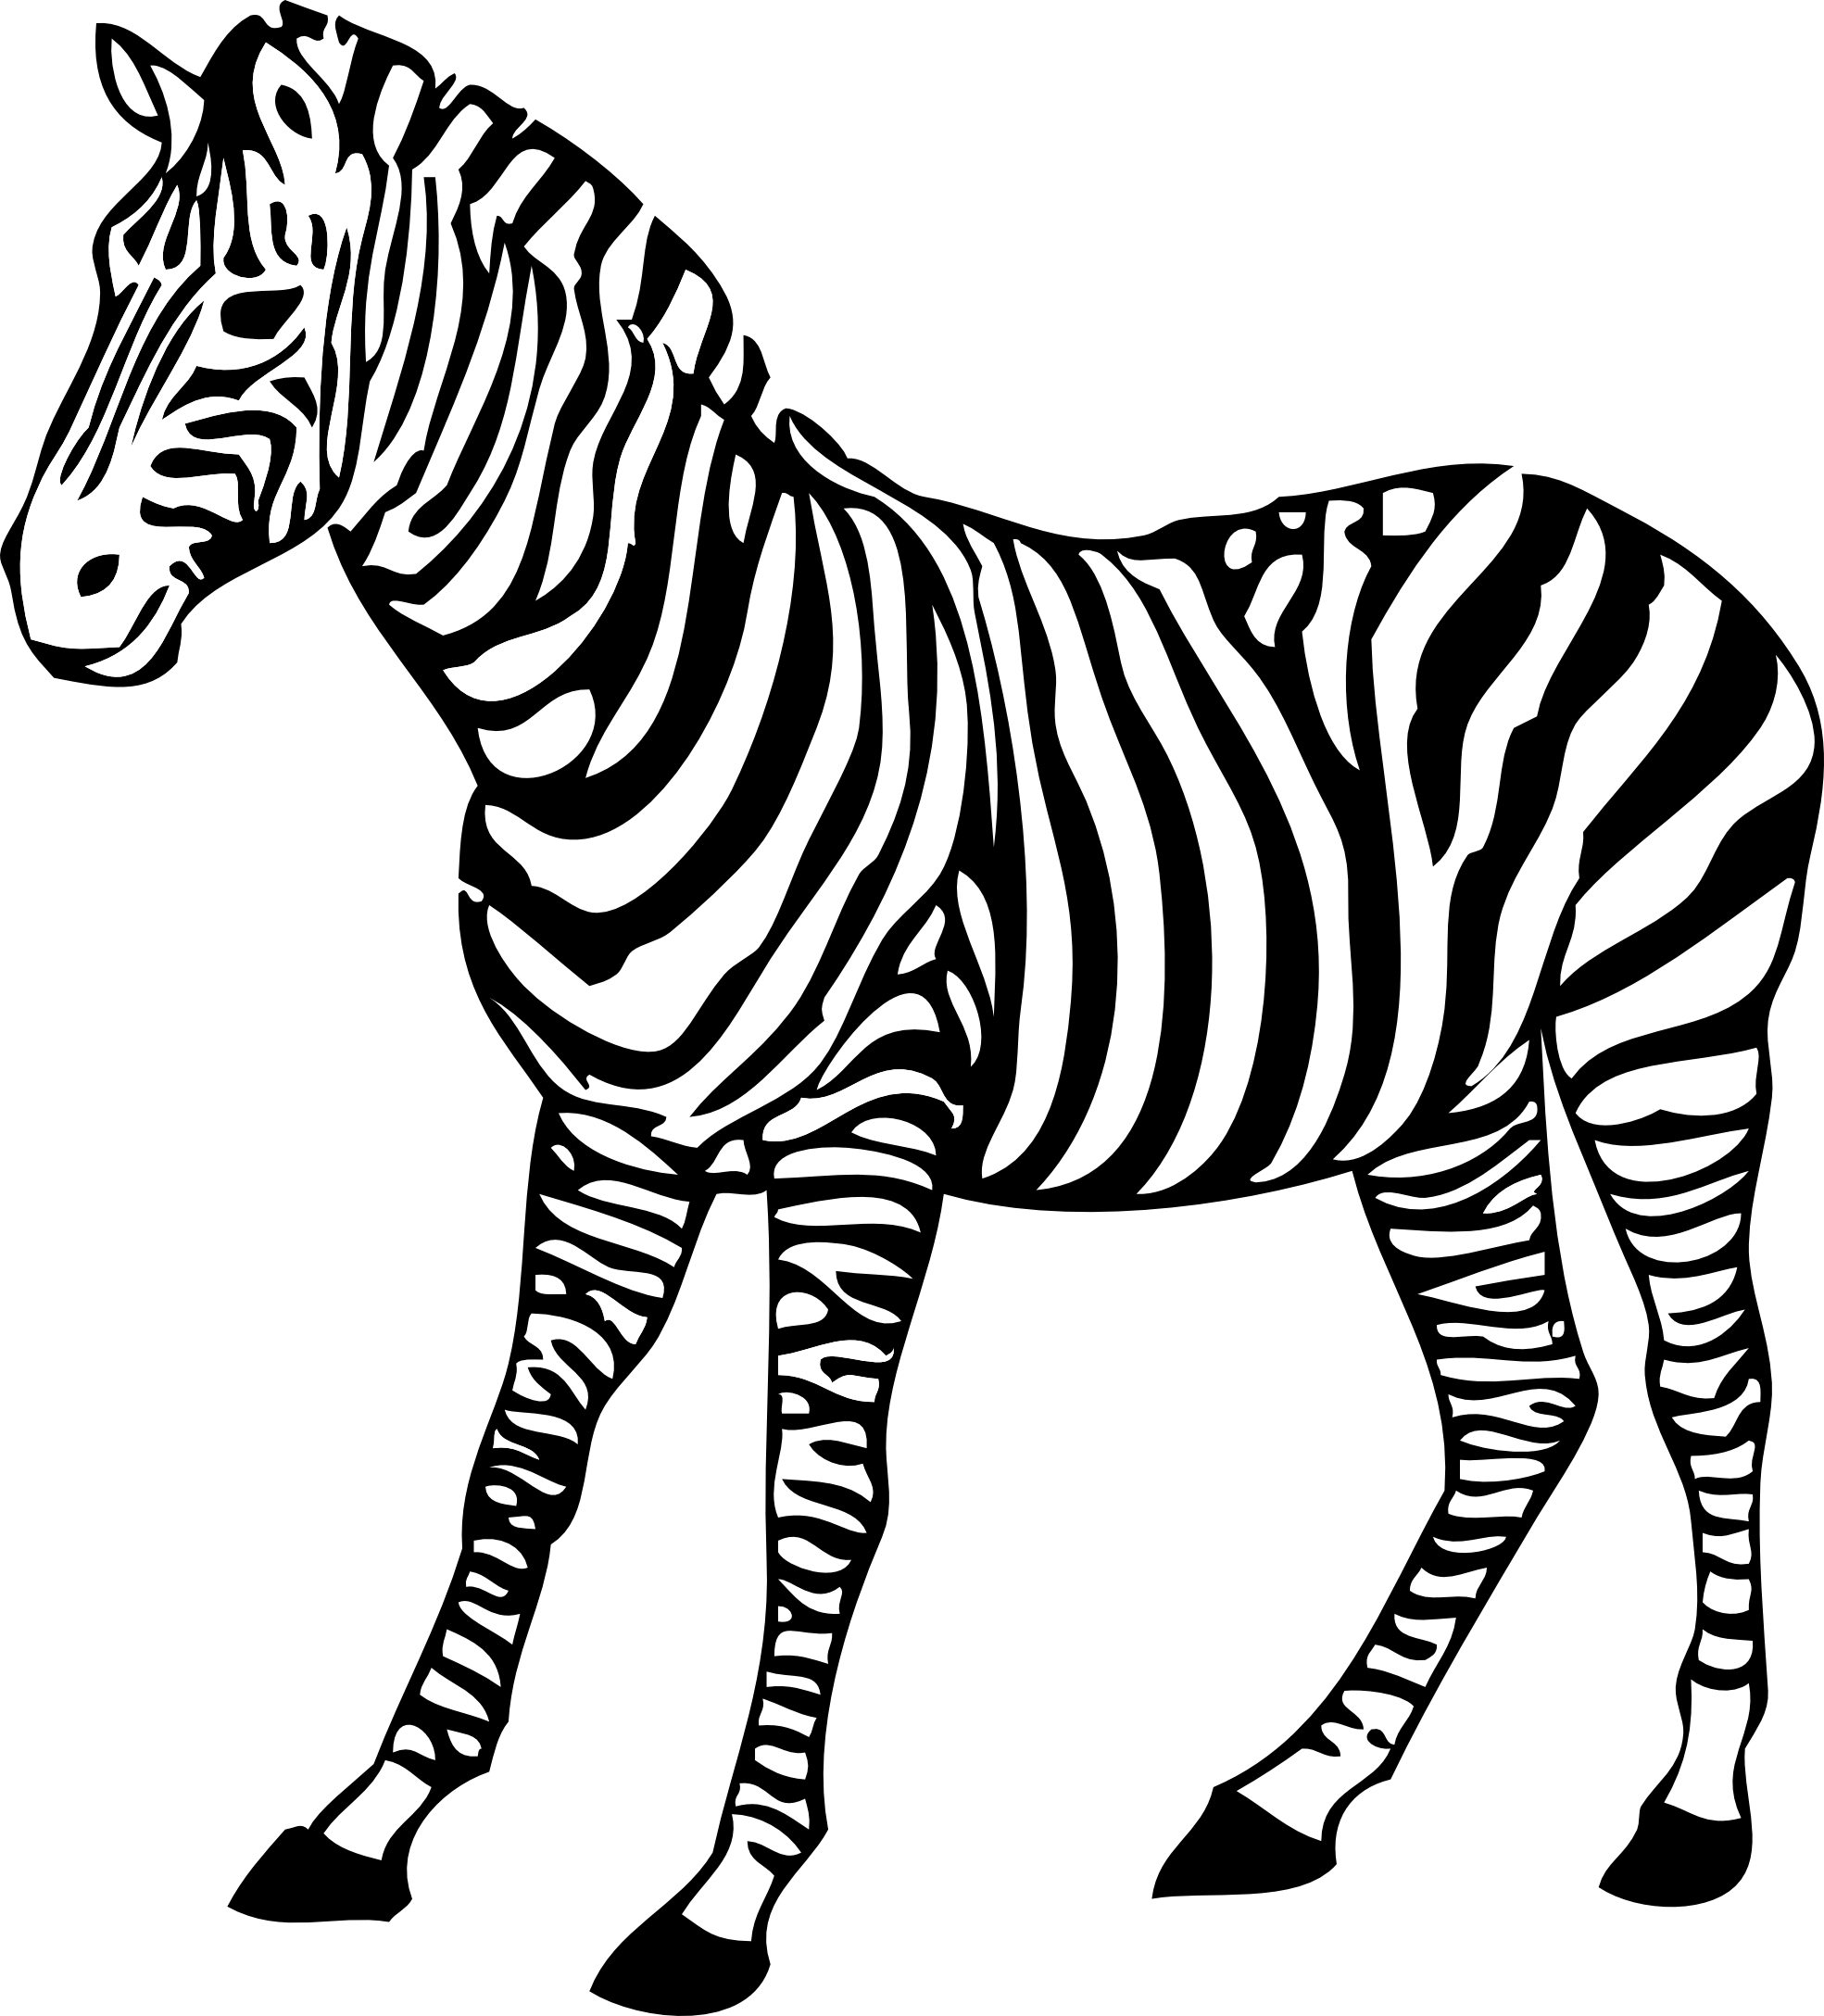 Zebra Clipart Black And White   Clipart Panda   Free Clipart Images